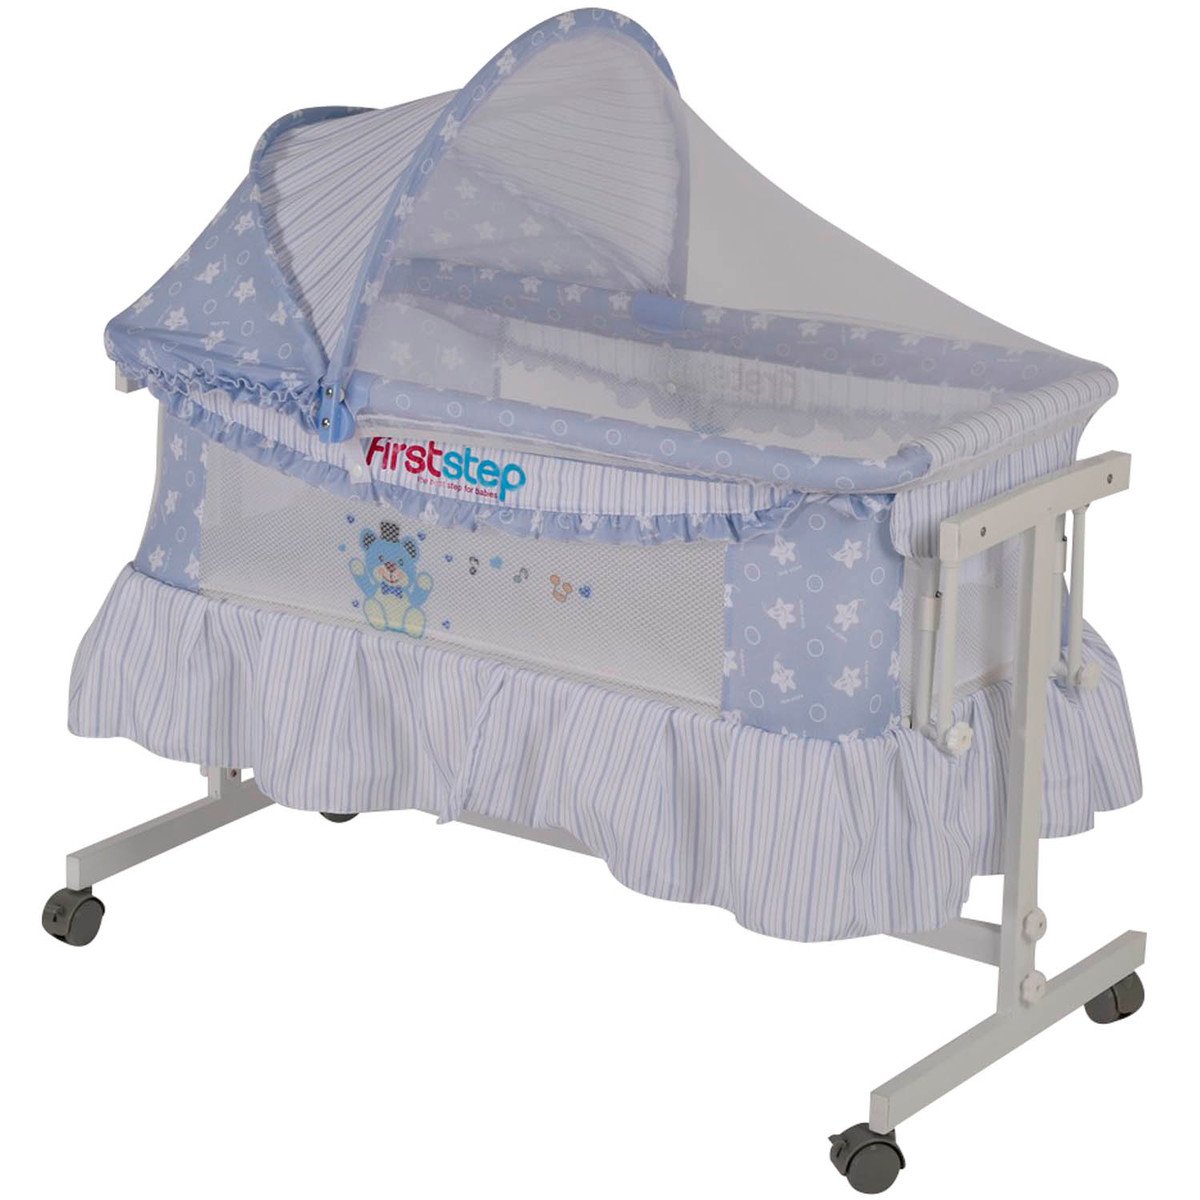 First Step Baby Steel Bed G70